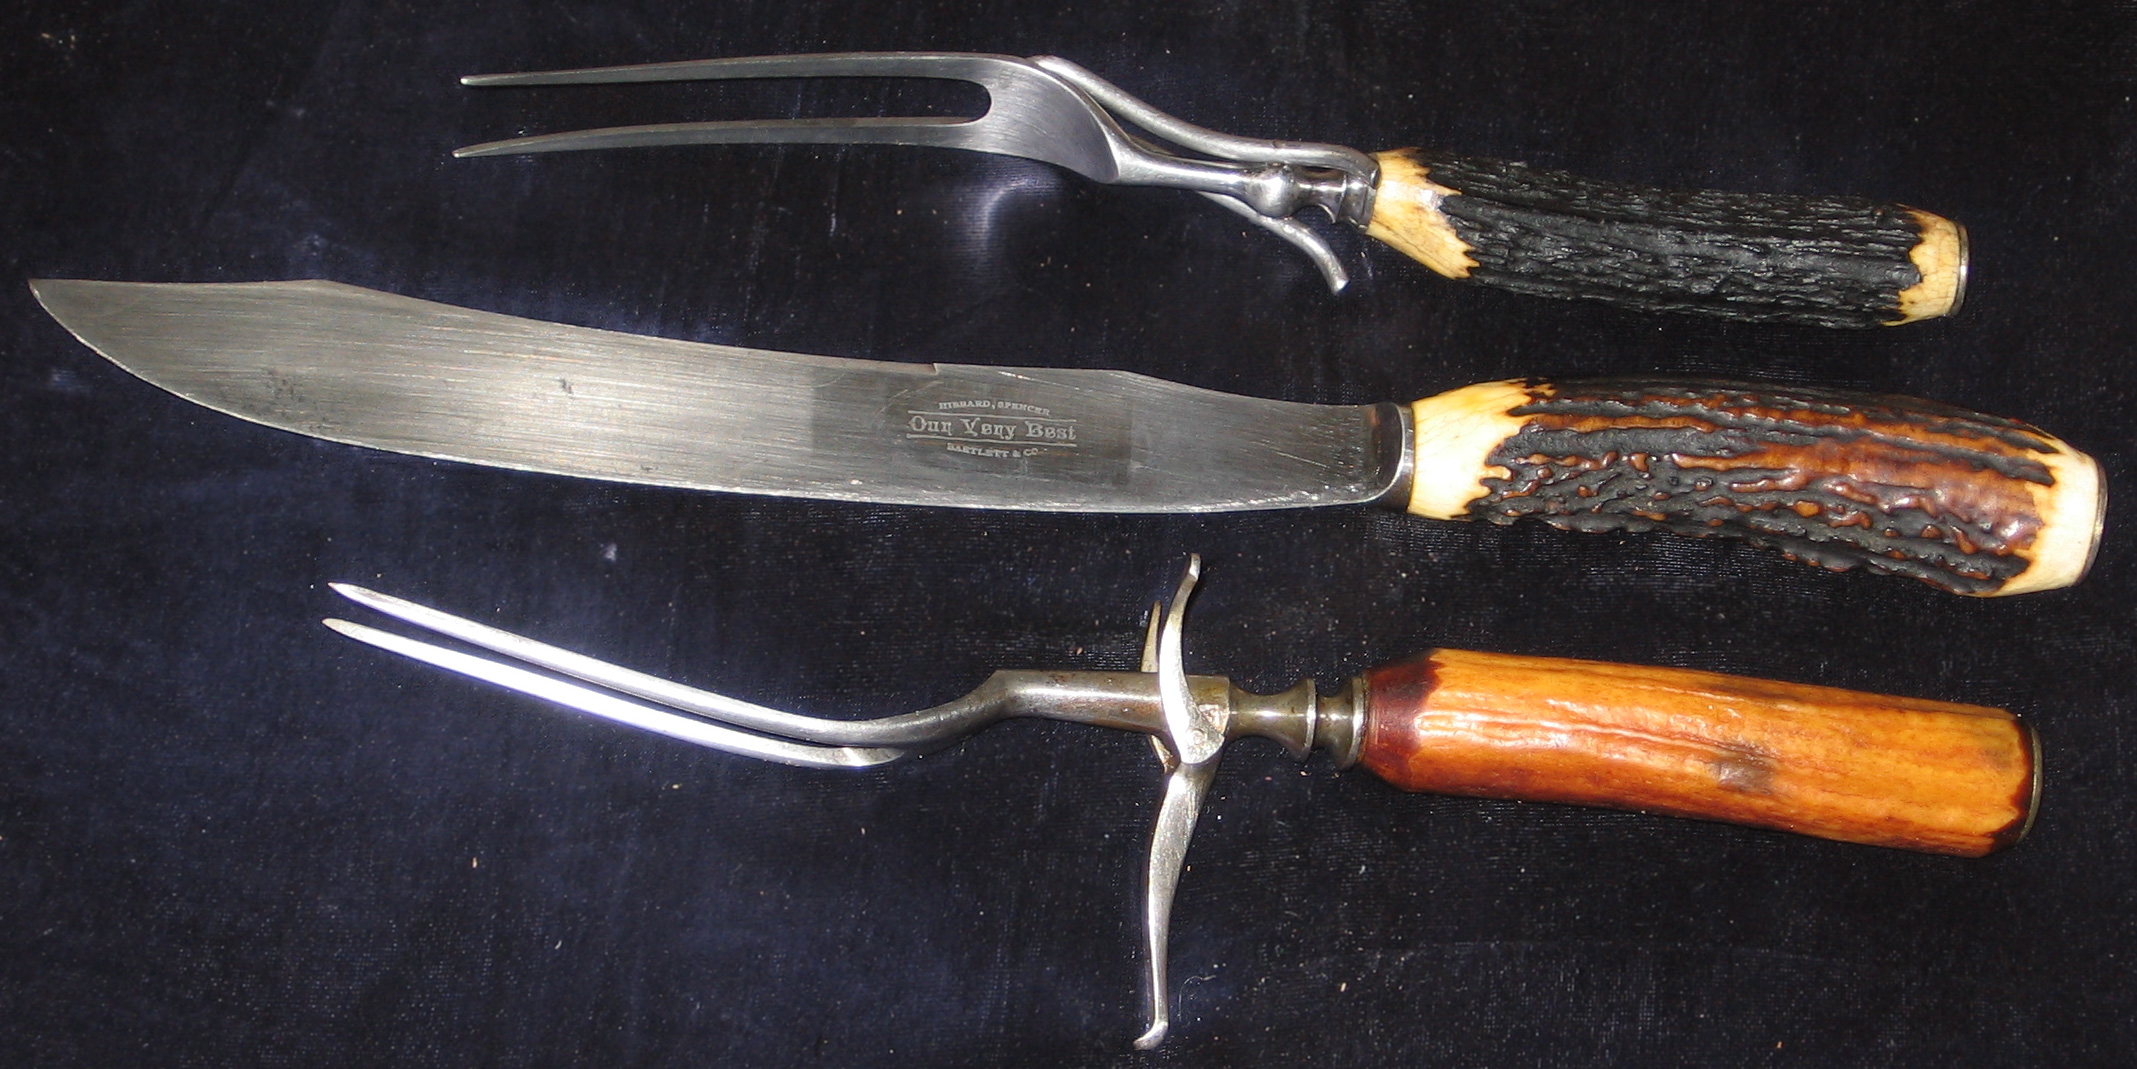 https://upload.wikimedia.org/wikipedia/commons/a/ad/Old_carving_knife_and_forks.JPG